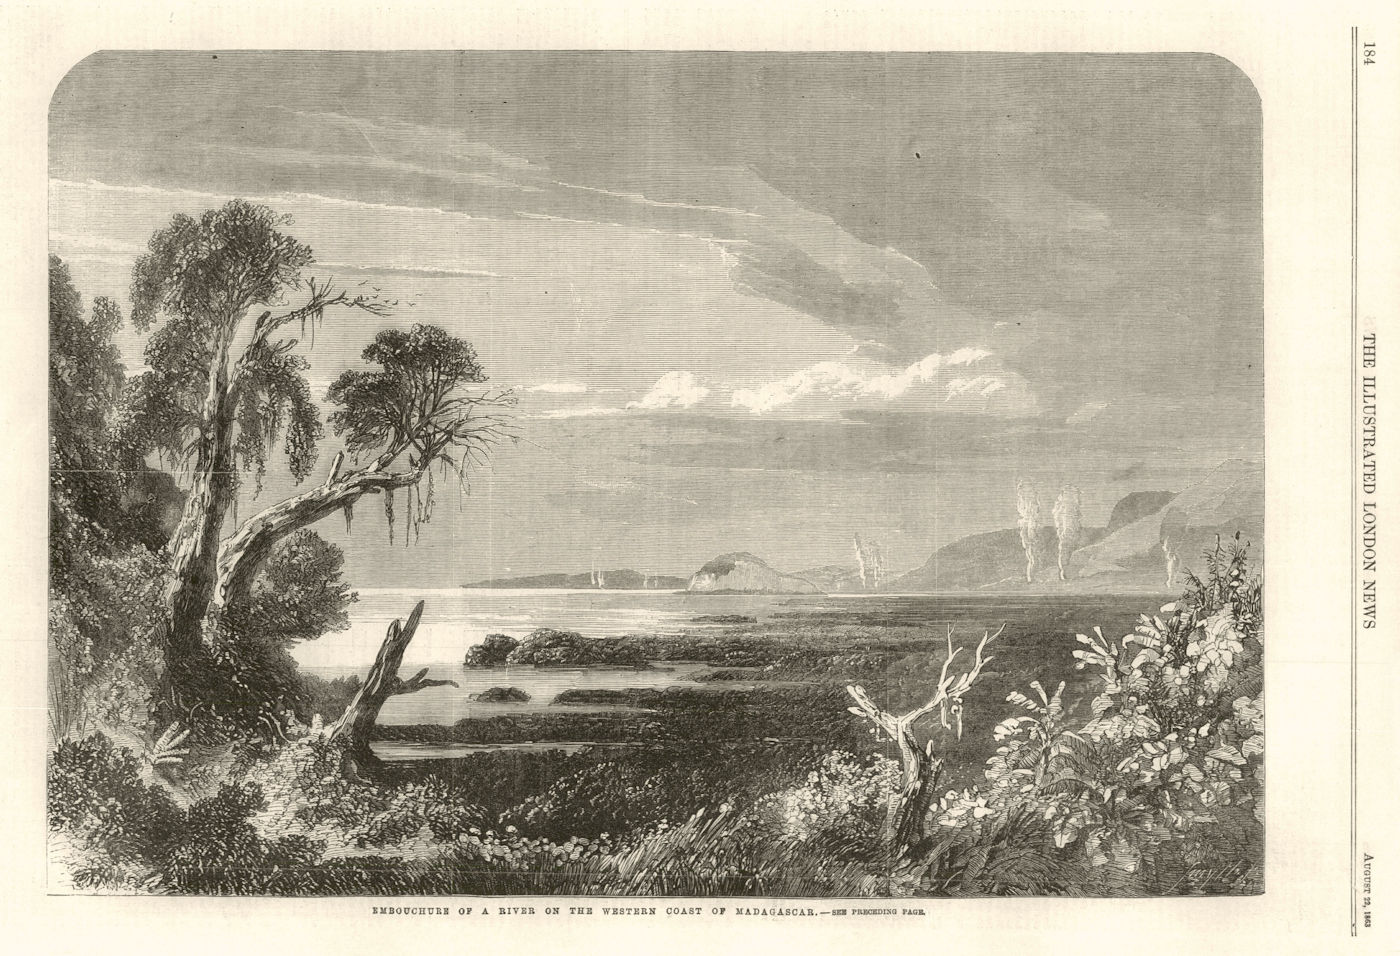 Associate Product Embouchure of a river on the western coast of Madagascar 1863 antique ILN page